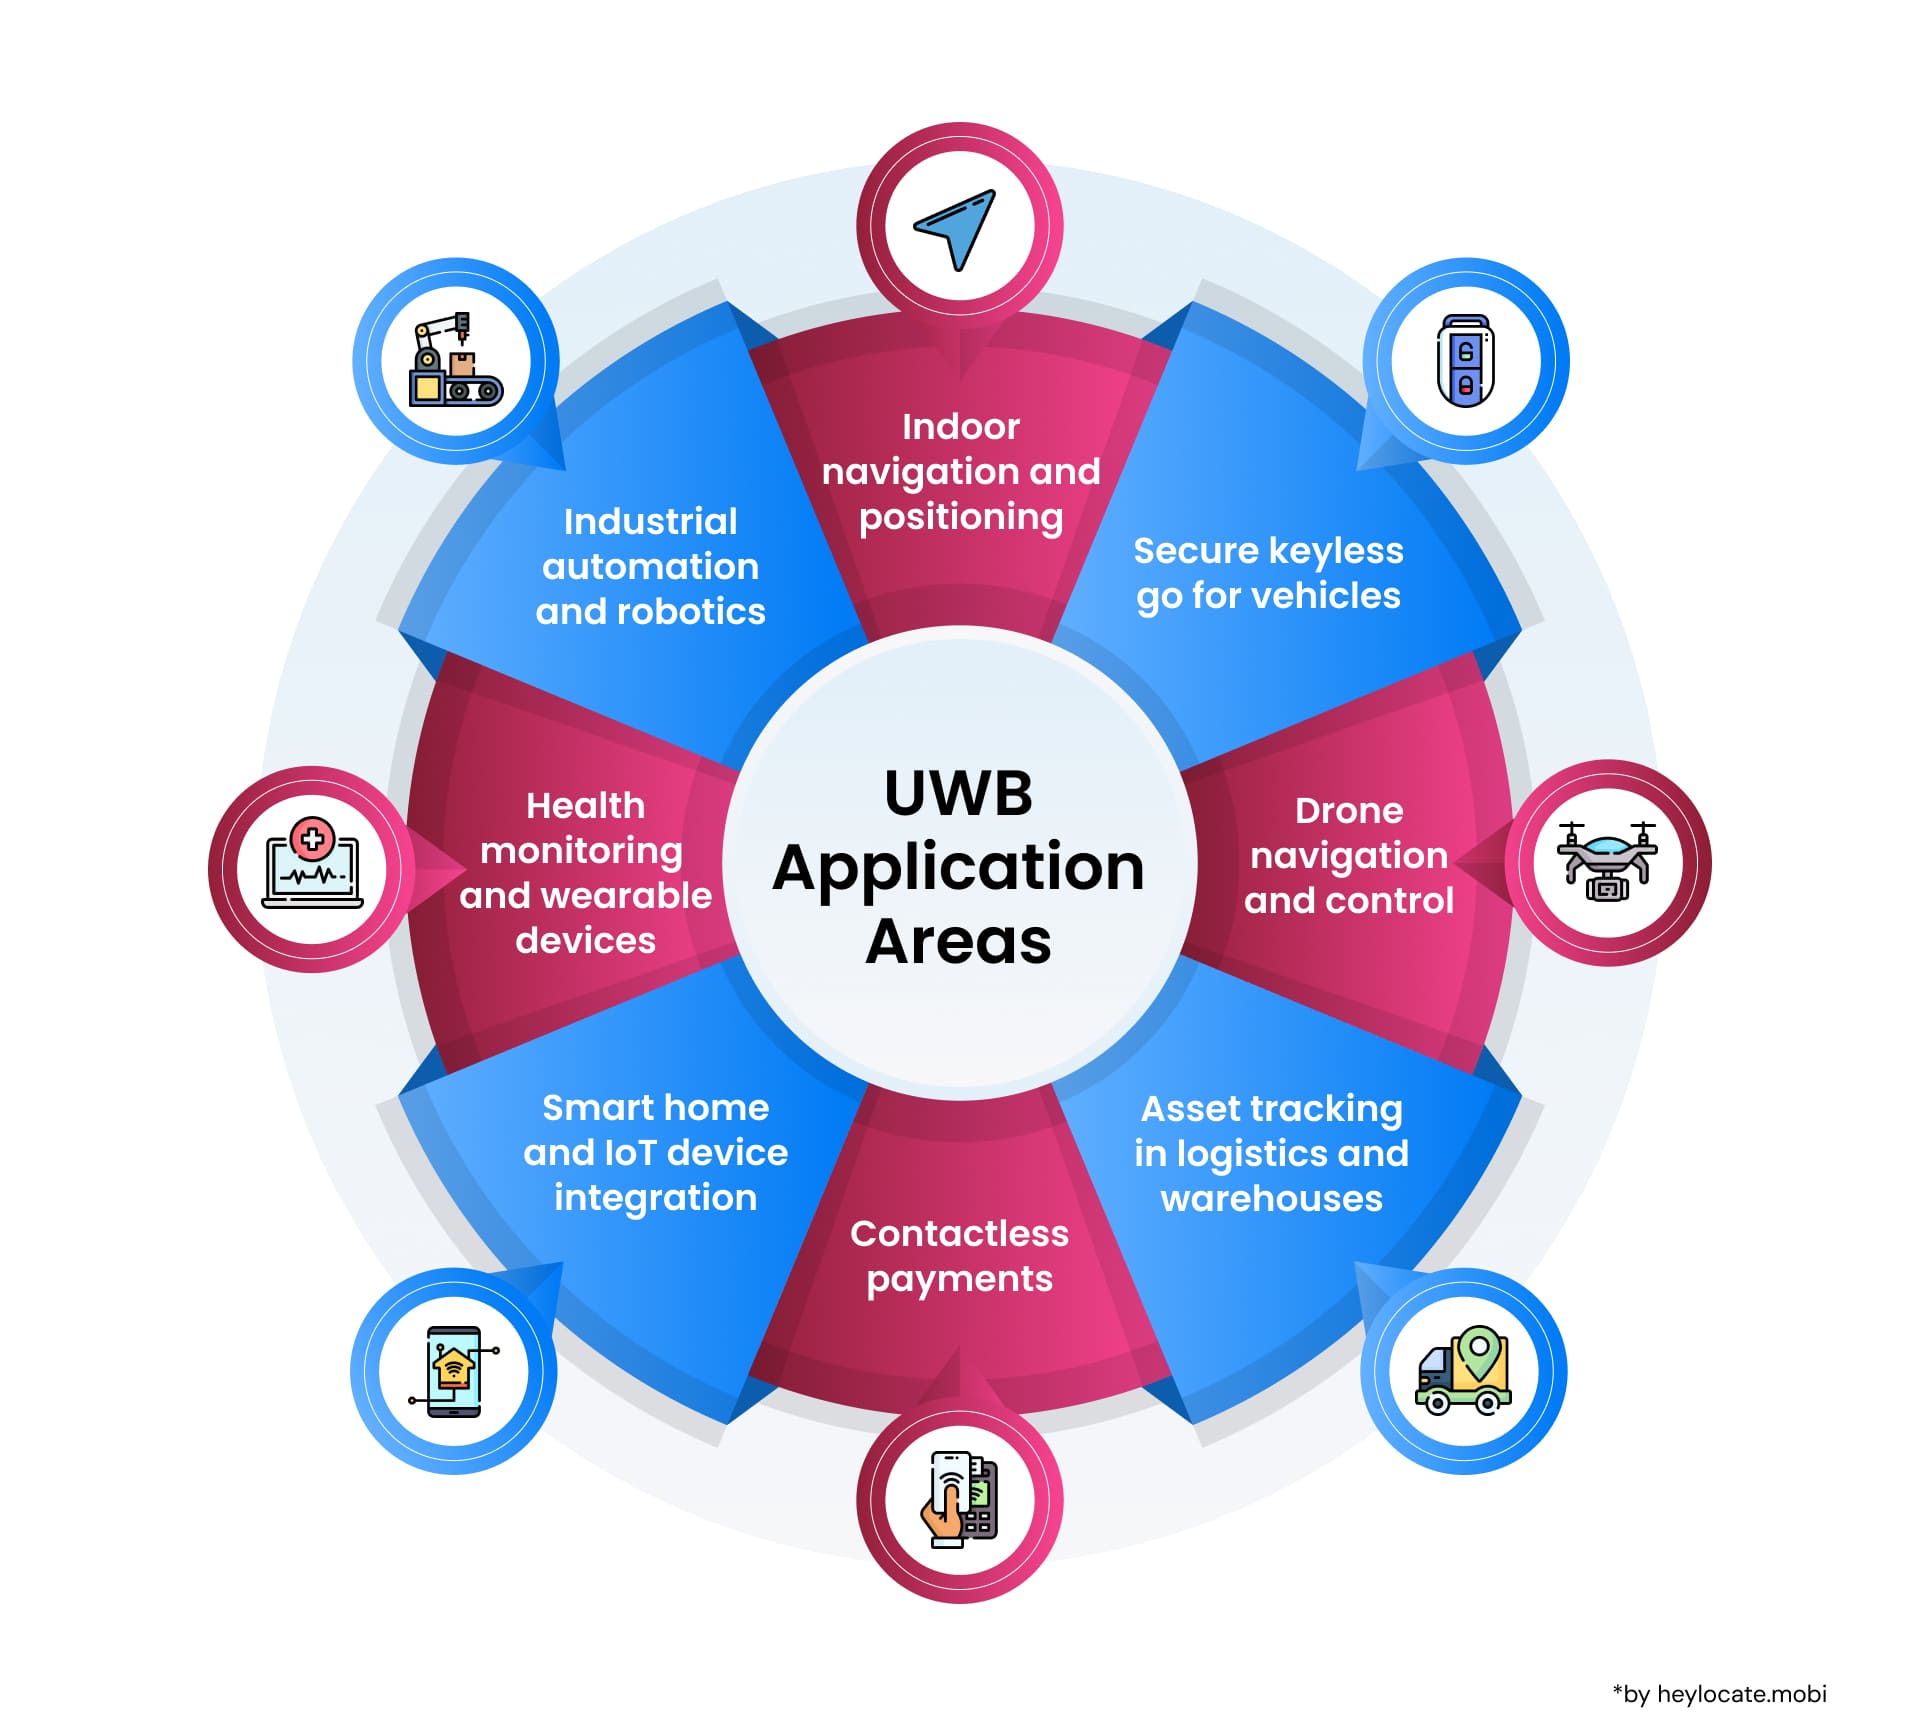 HeyLocate Infographic that depicts various application areas for Ultra-Wideband technology, such as industrial automation, health monitoring, smart home integration, and more